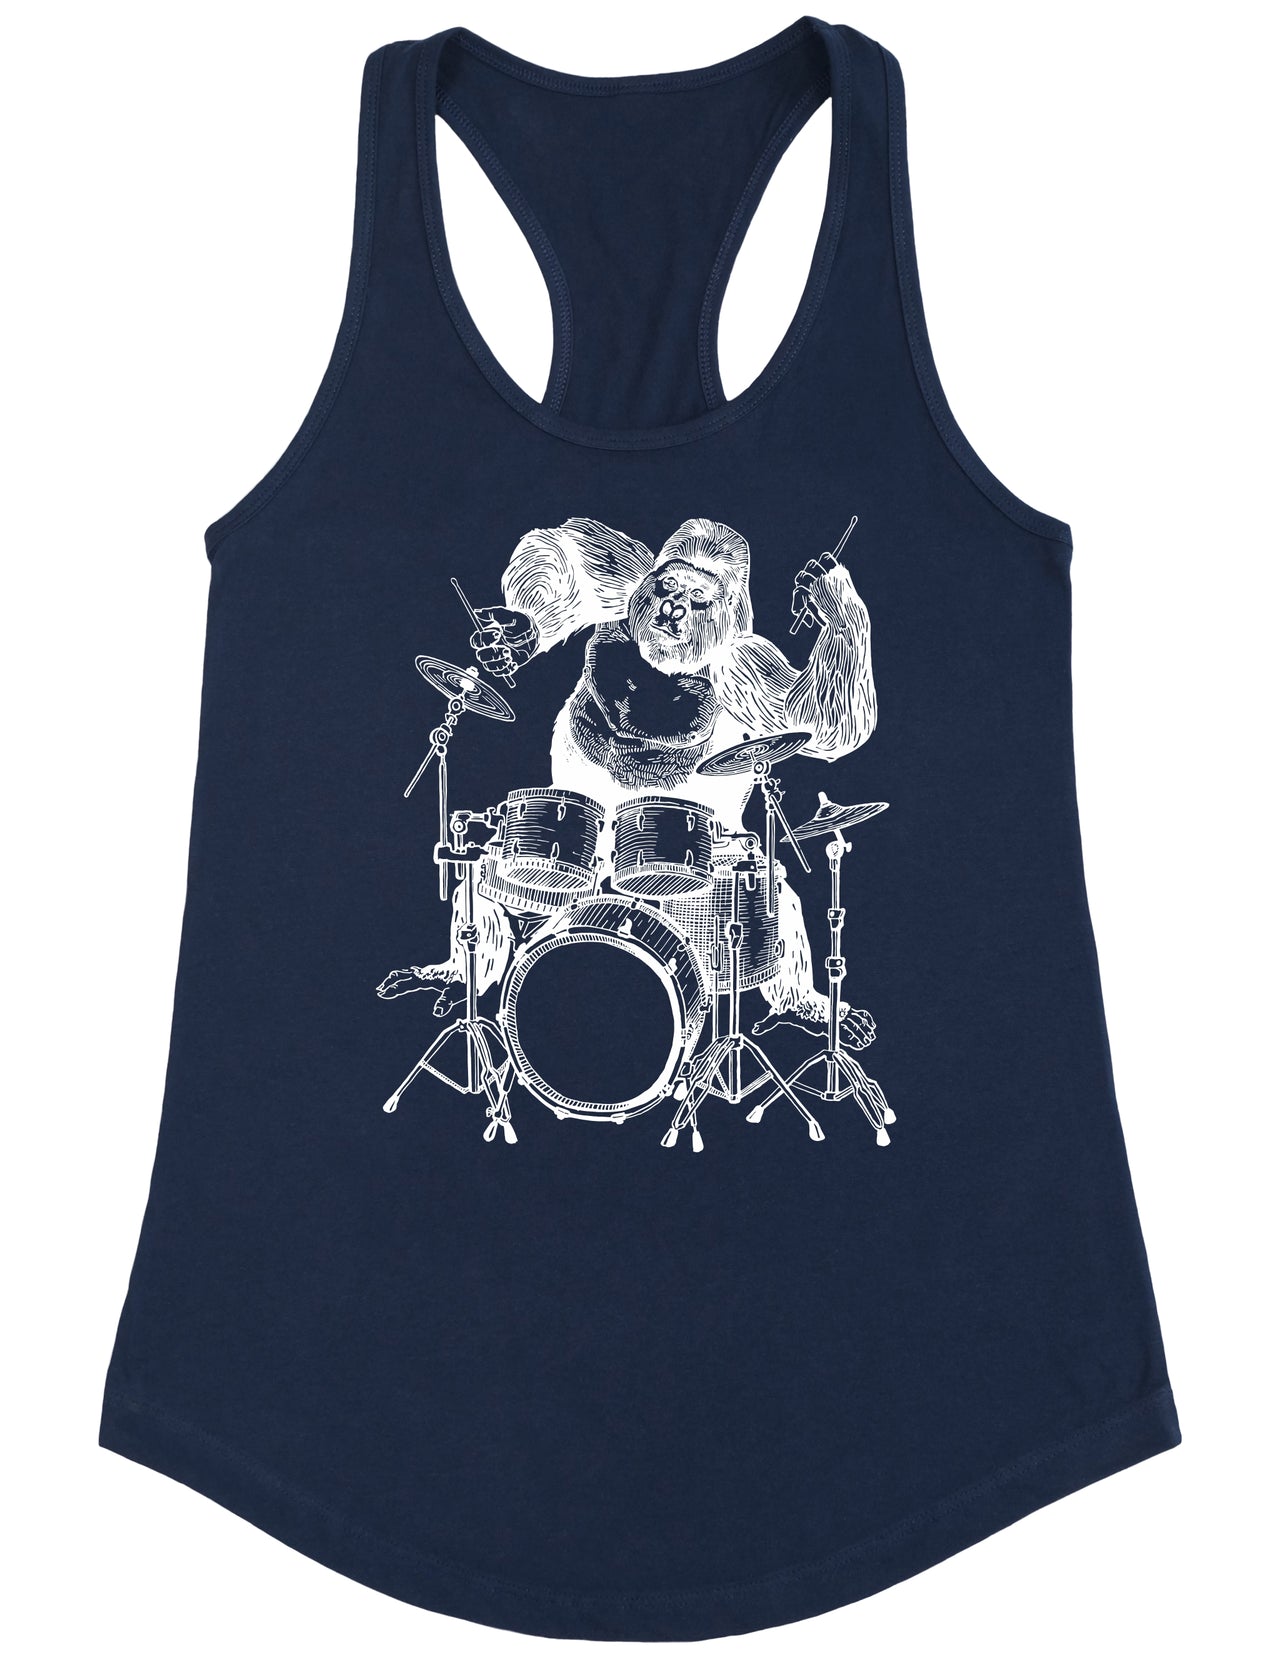 SEEMBO Gorilla Playing Drums Women's Poly-Cotton Tank Top